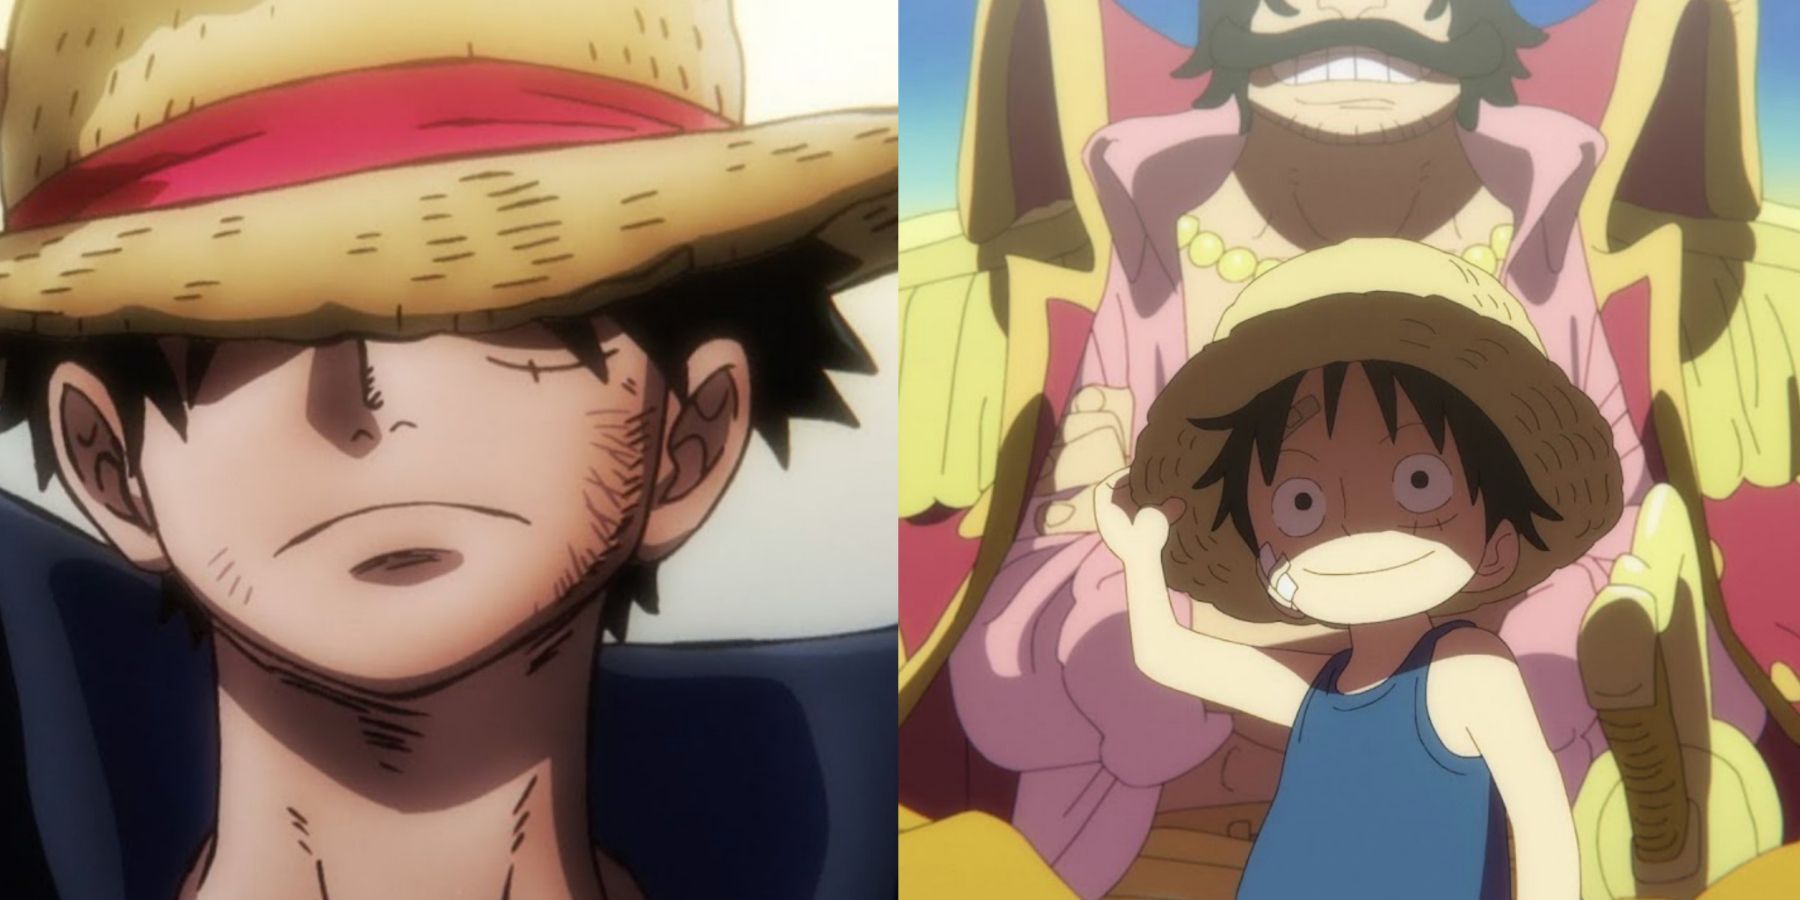 We're Gunna Be King of the Pirates! A 'One Piece' Straw Hat